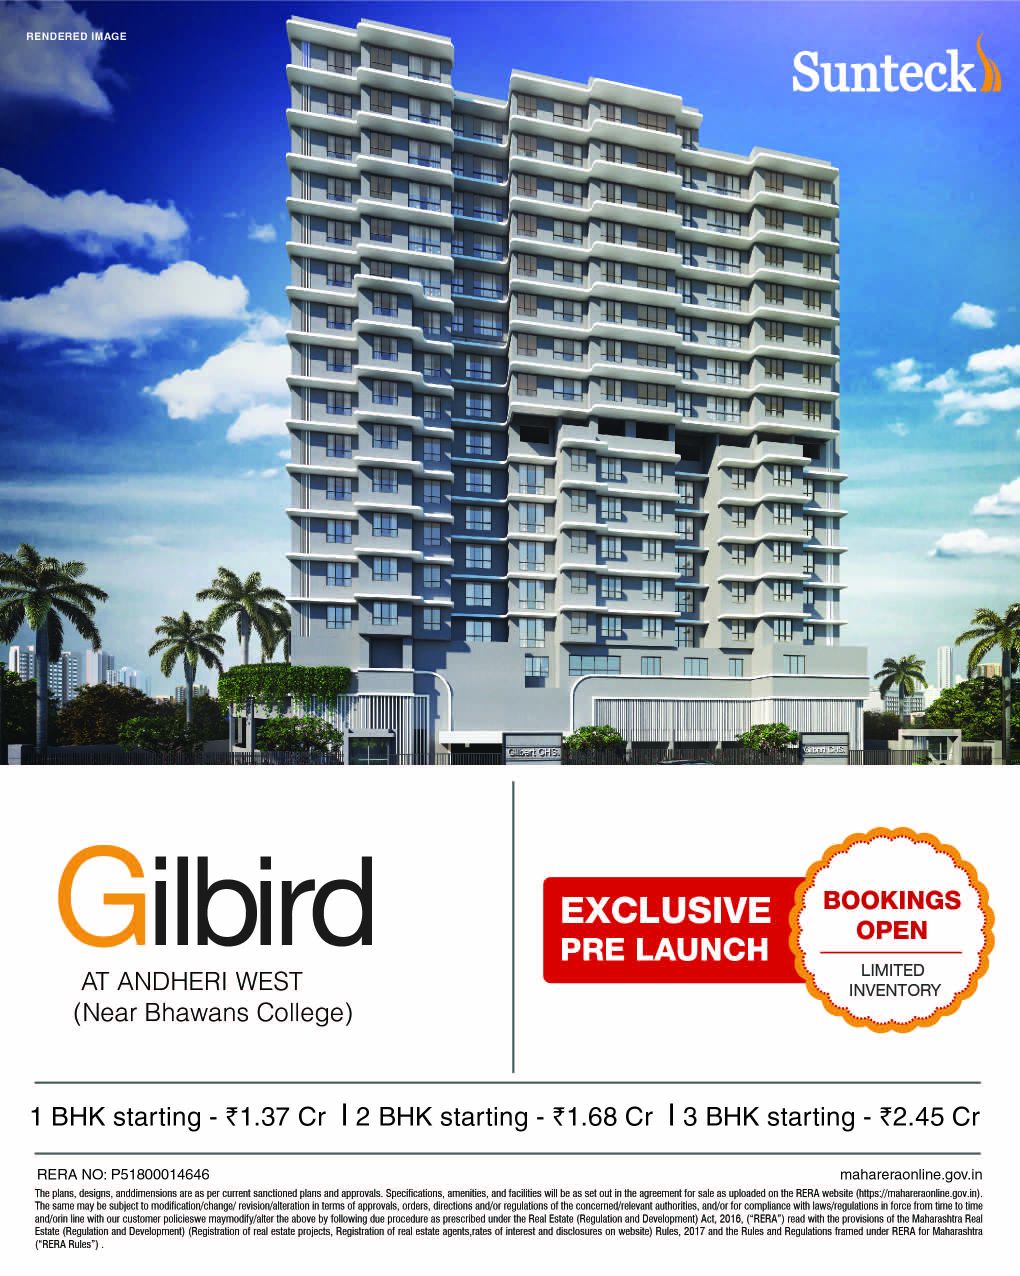 Sunteck Gilbird - New Launch Project by Sunteck Realty in Andheri West, Mumbai Update